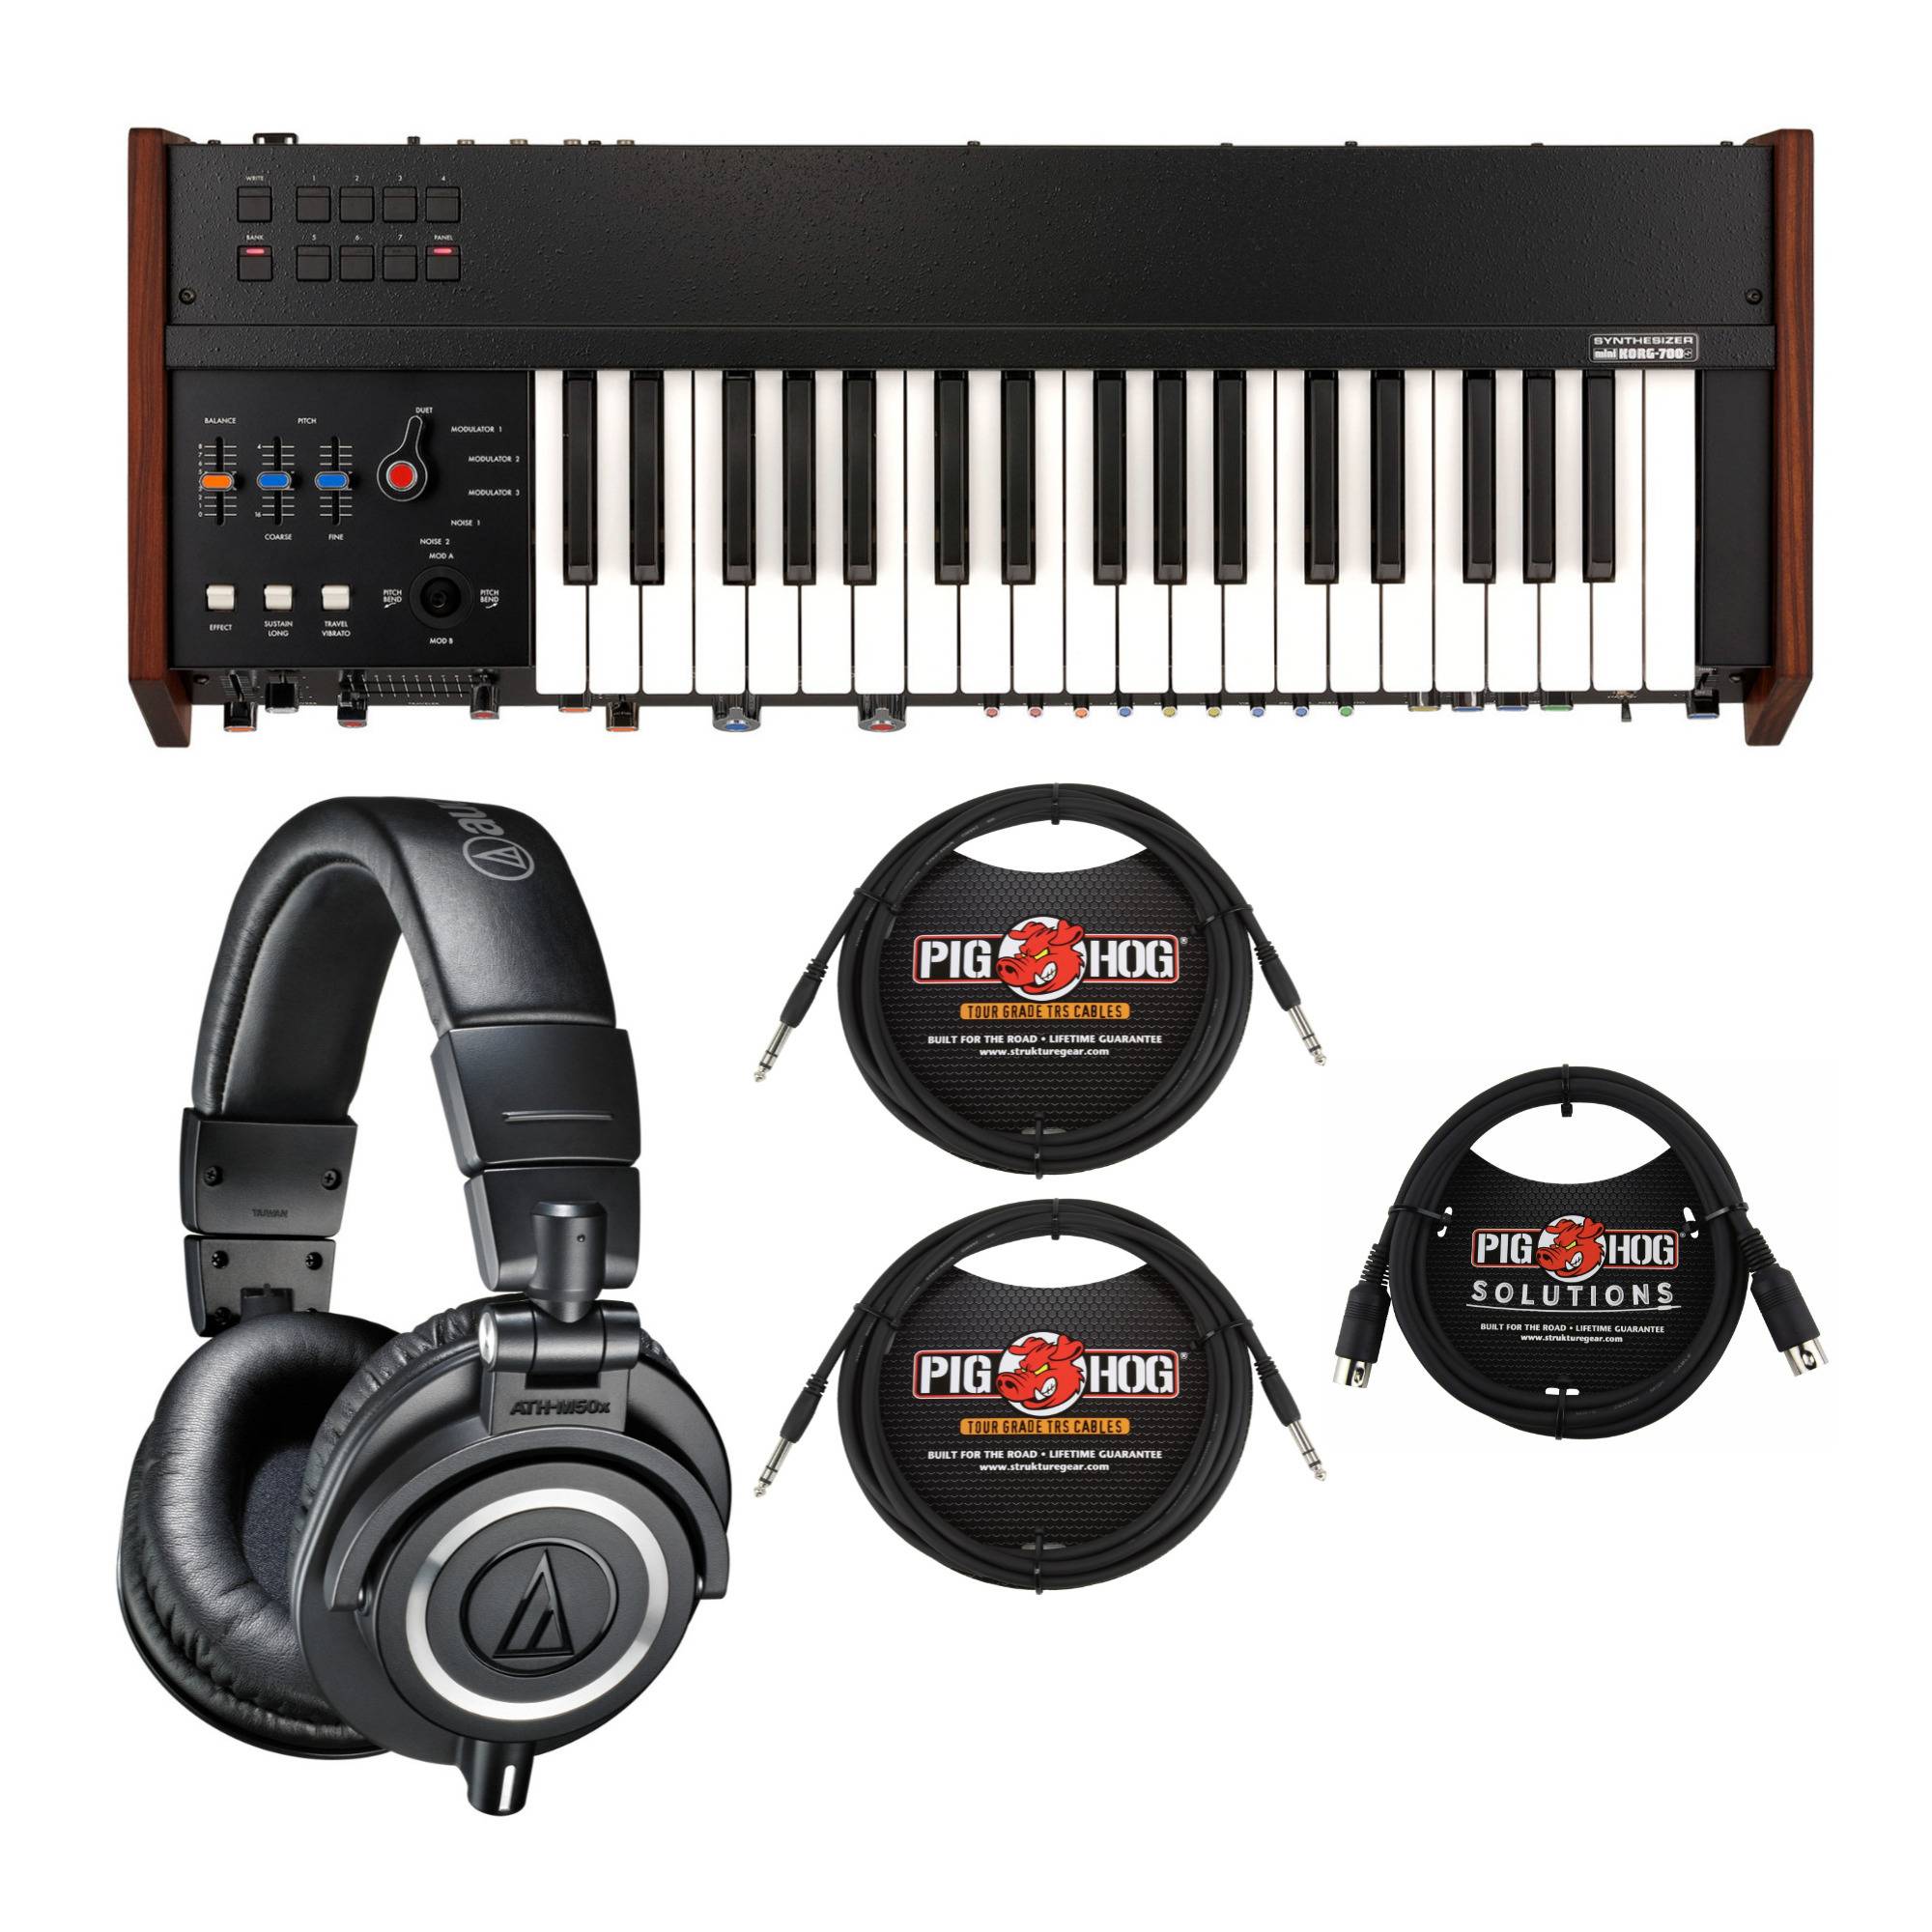 Korg miniKORG 700FS Monophonic Analog Synthesizer with Professional Studio Headphones and Cables